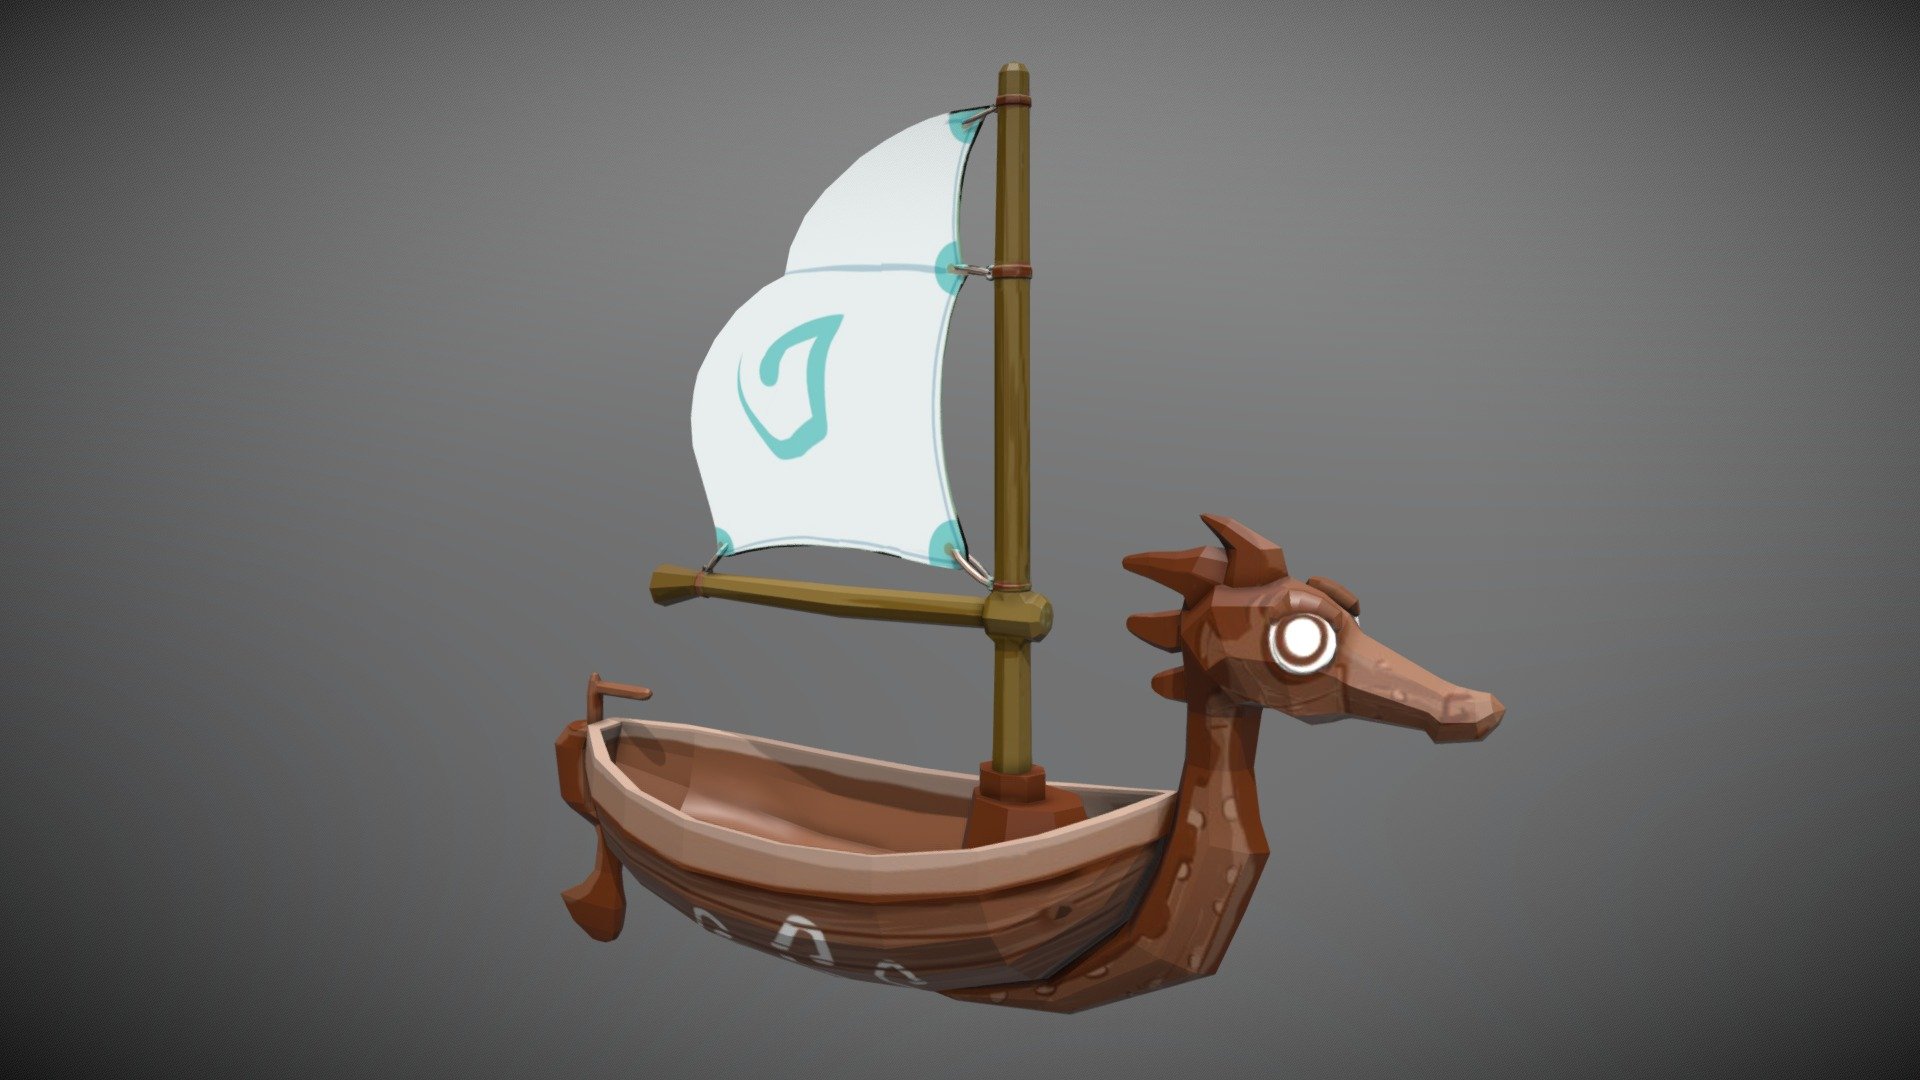 This is a boat model I made for a Jam. Texturized using Substance.
Design by Diego Cambre 3d model